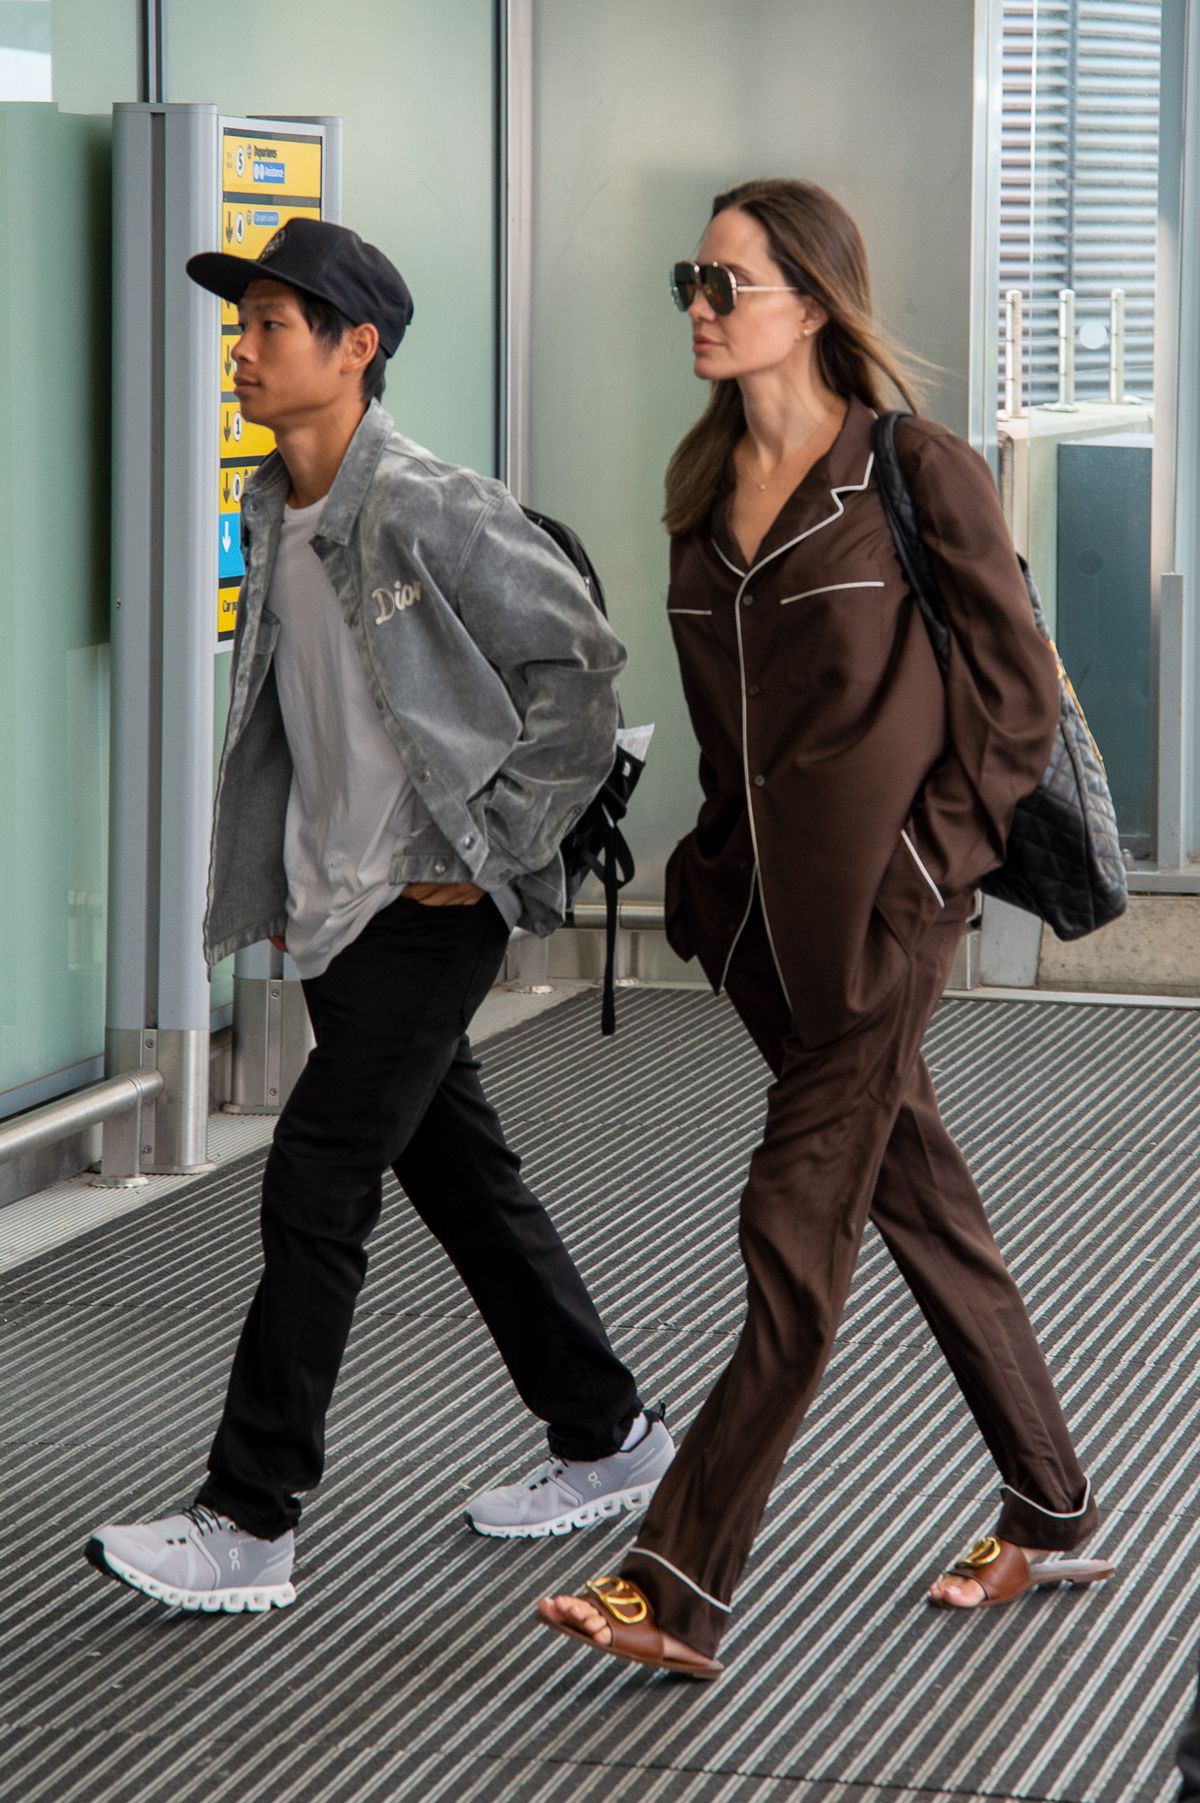 EXCLUSIVE: AJ In Her PJ's! Angelina Jolie And Son Pax Spotted Flying Out Of Heathrow Airport